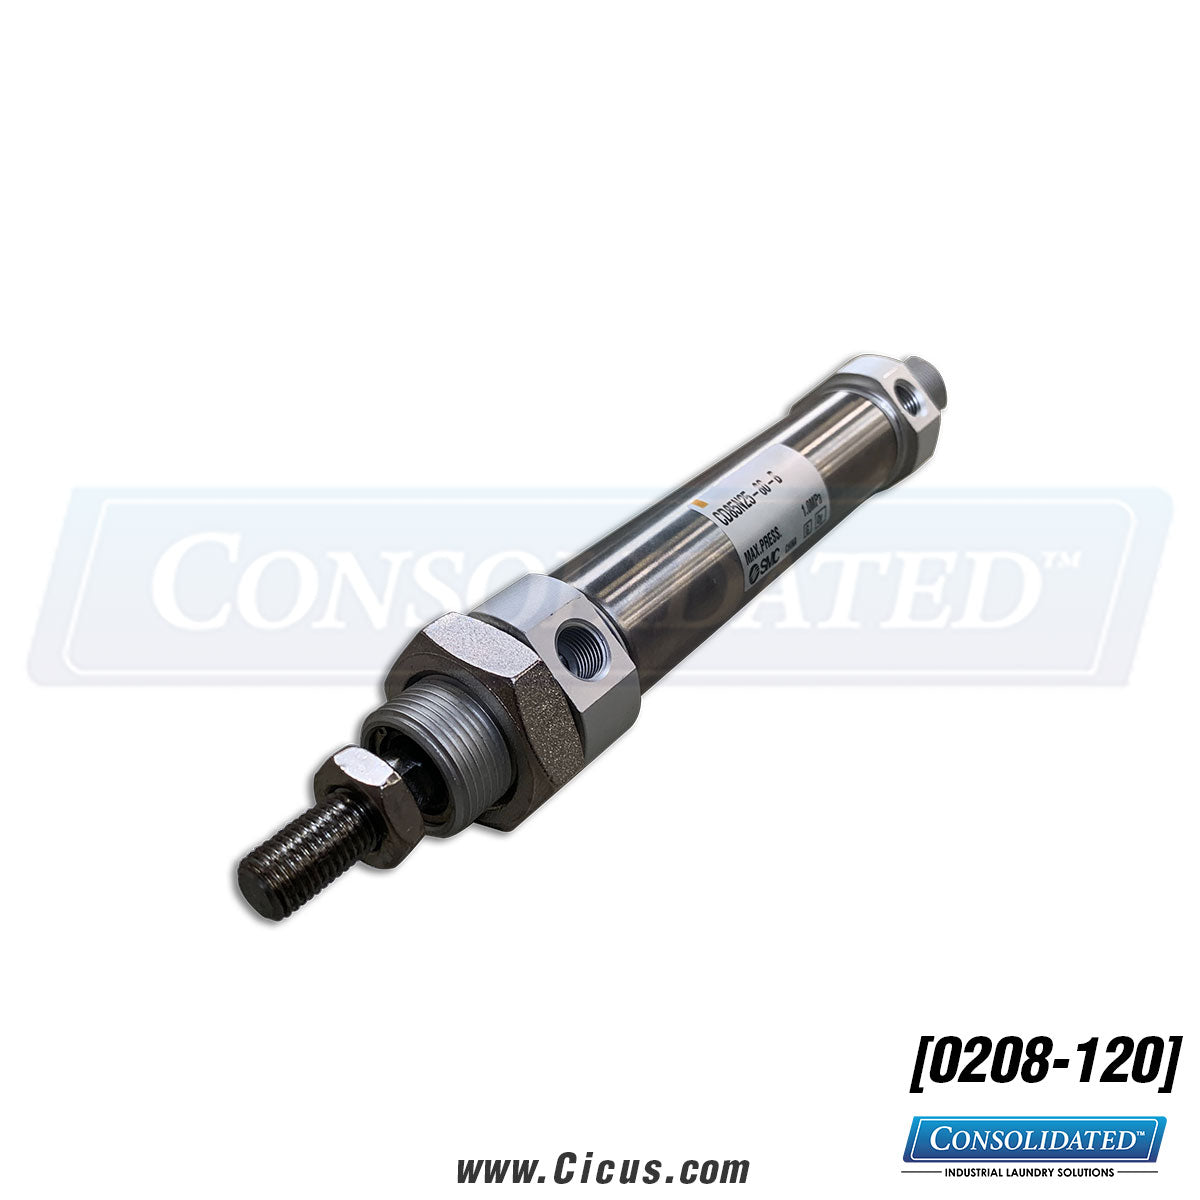 Chicago Dryer Air Cylinder 25mm Bore x 80mm Stroke [0208-120]